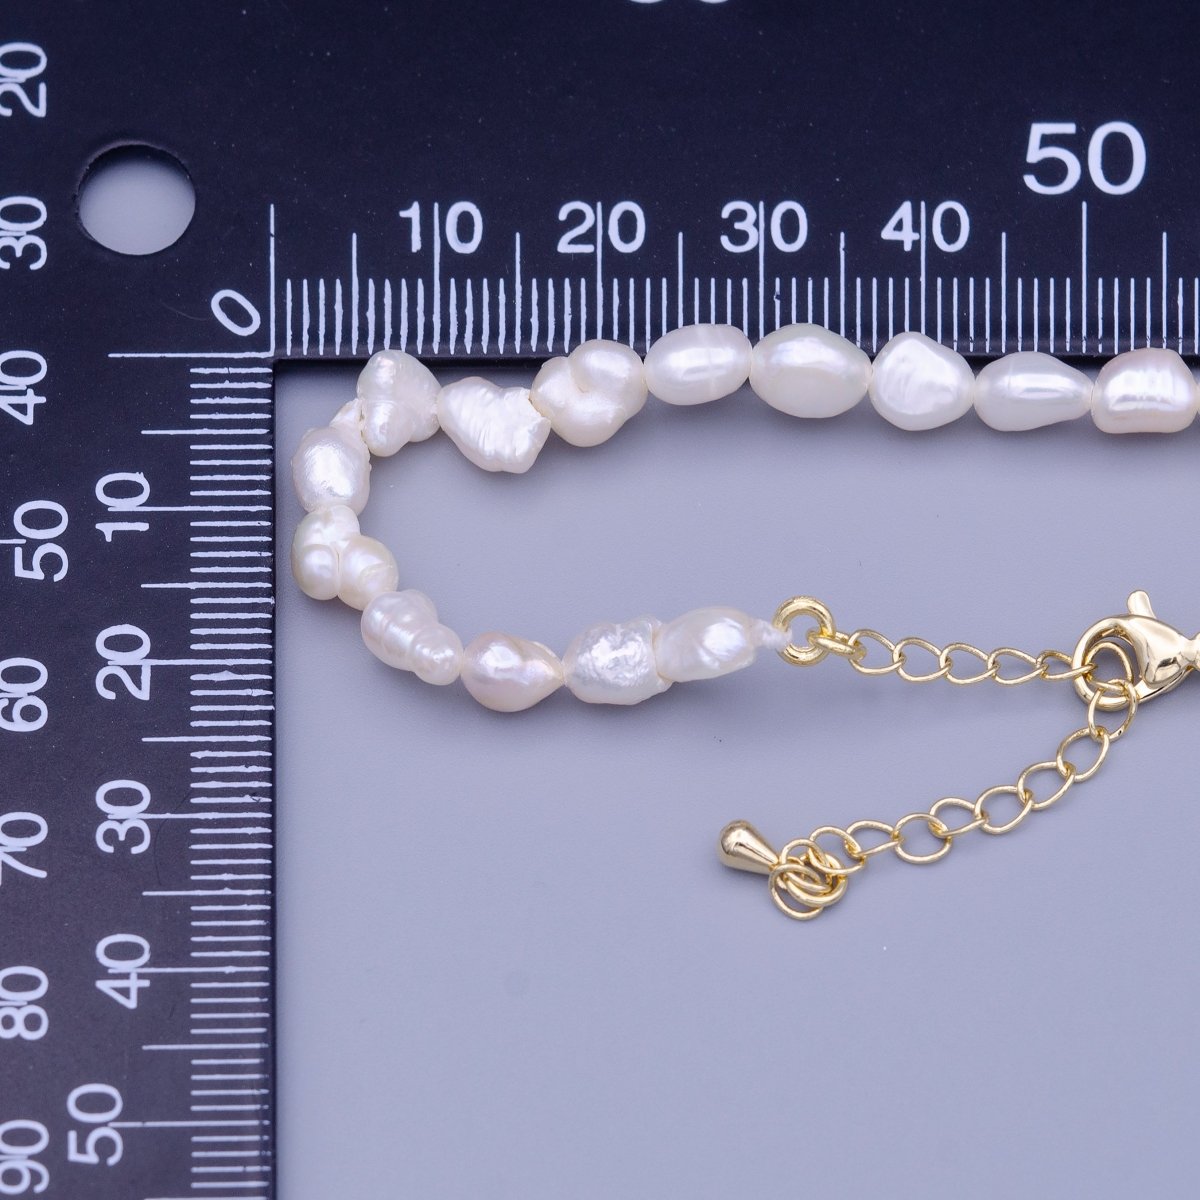 14.5 Inch Natural 5mm Genuine White Freshwater Pearl Choker Necklace | WA-1460 Clearance Pricing - DLUXCA